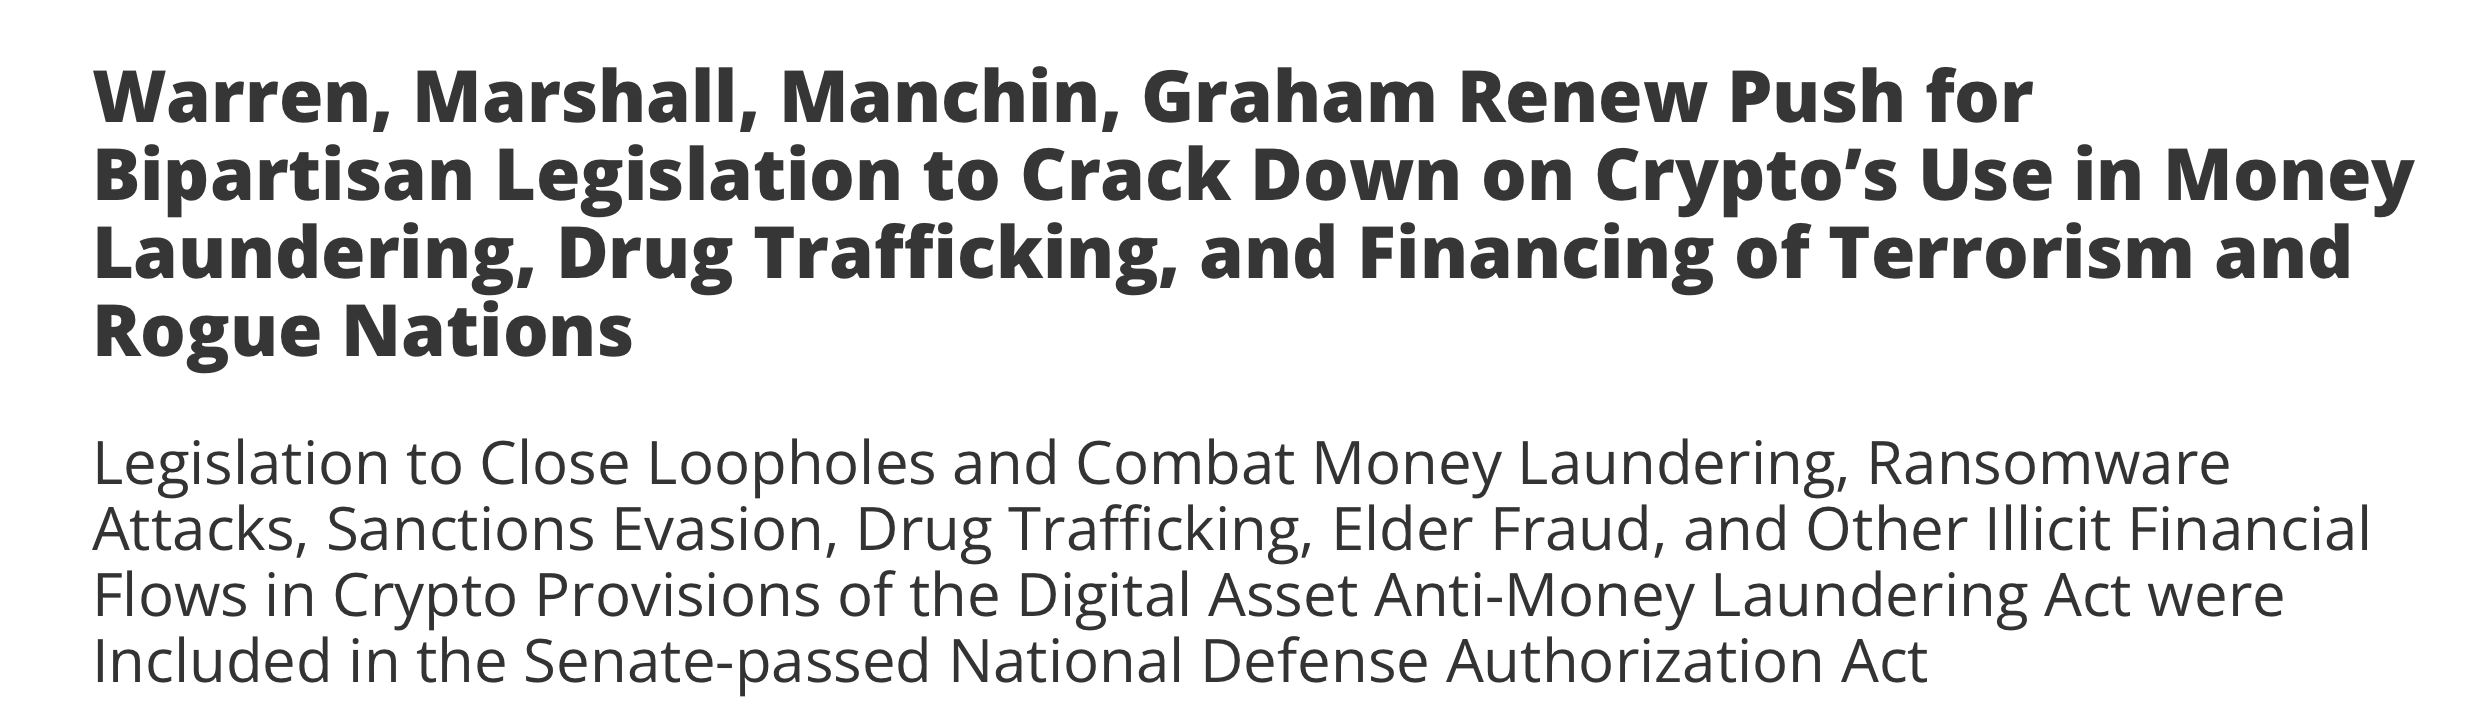 https://www.warren.senate.gov/newsroom/press-releases/warren-marshall-manchin-graham-renew-push-for-bipartisan-legislation-to-crack-down-on-cryptos-use-in-money-laundering-drug-trafficking-and-financing-of-terrorism-and-rogue-nations